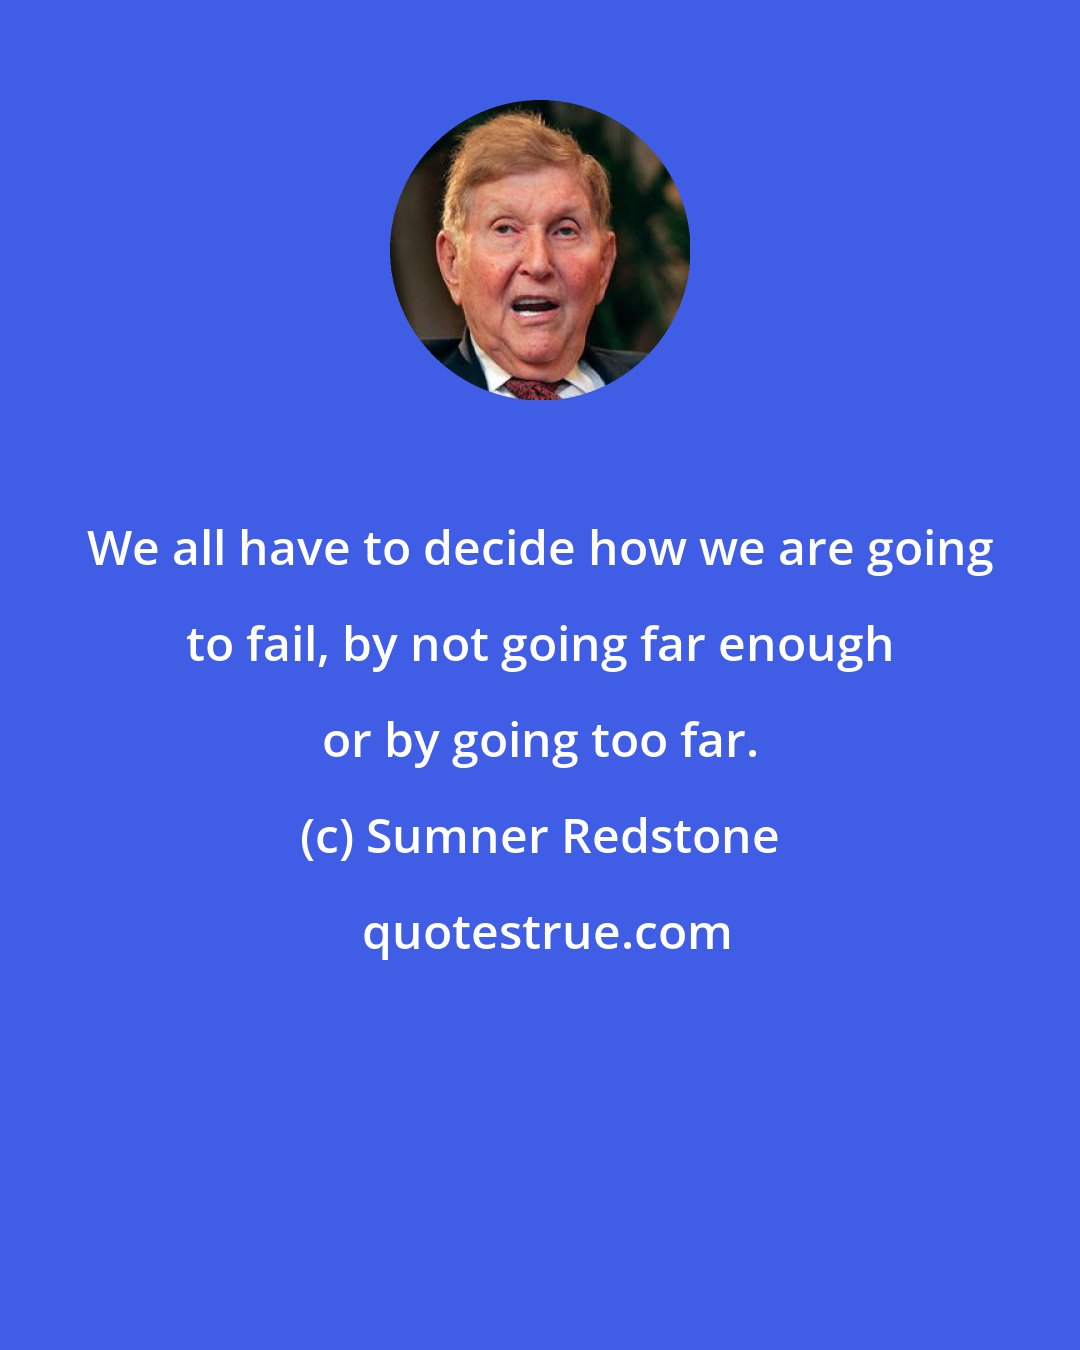 Sumner Redstone: We all have to decide how we are going to fail, by not going far enough or by going too far.